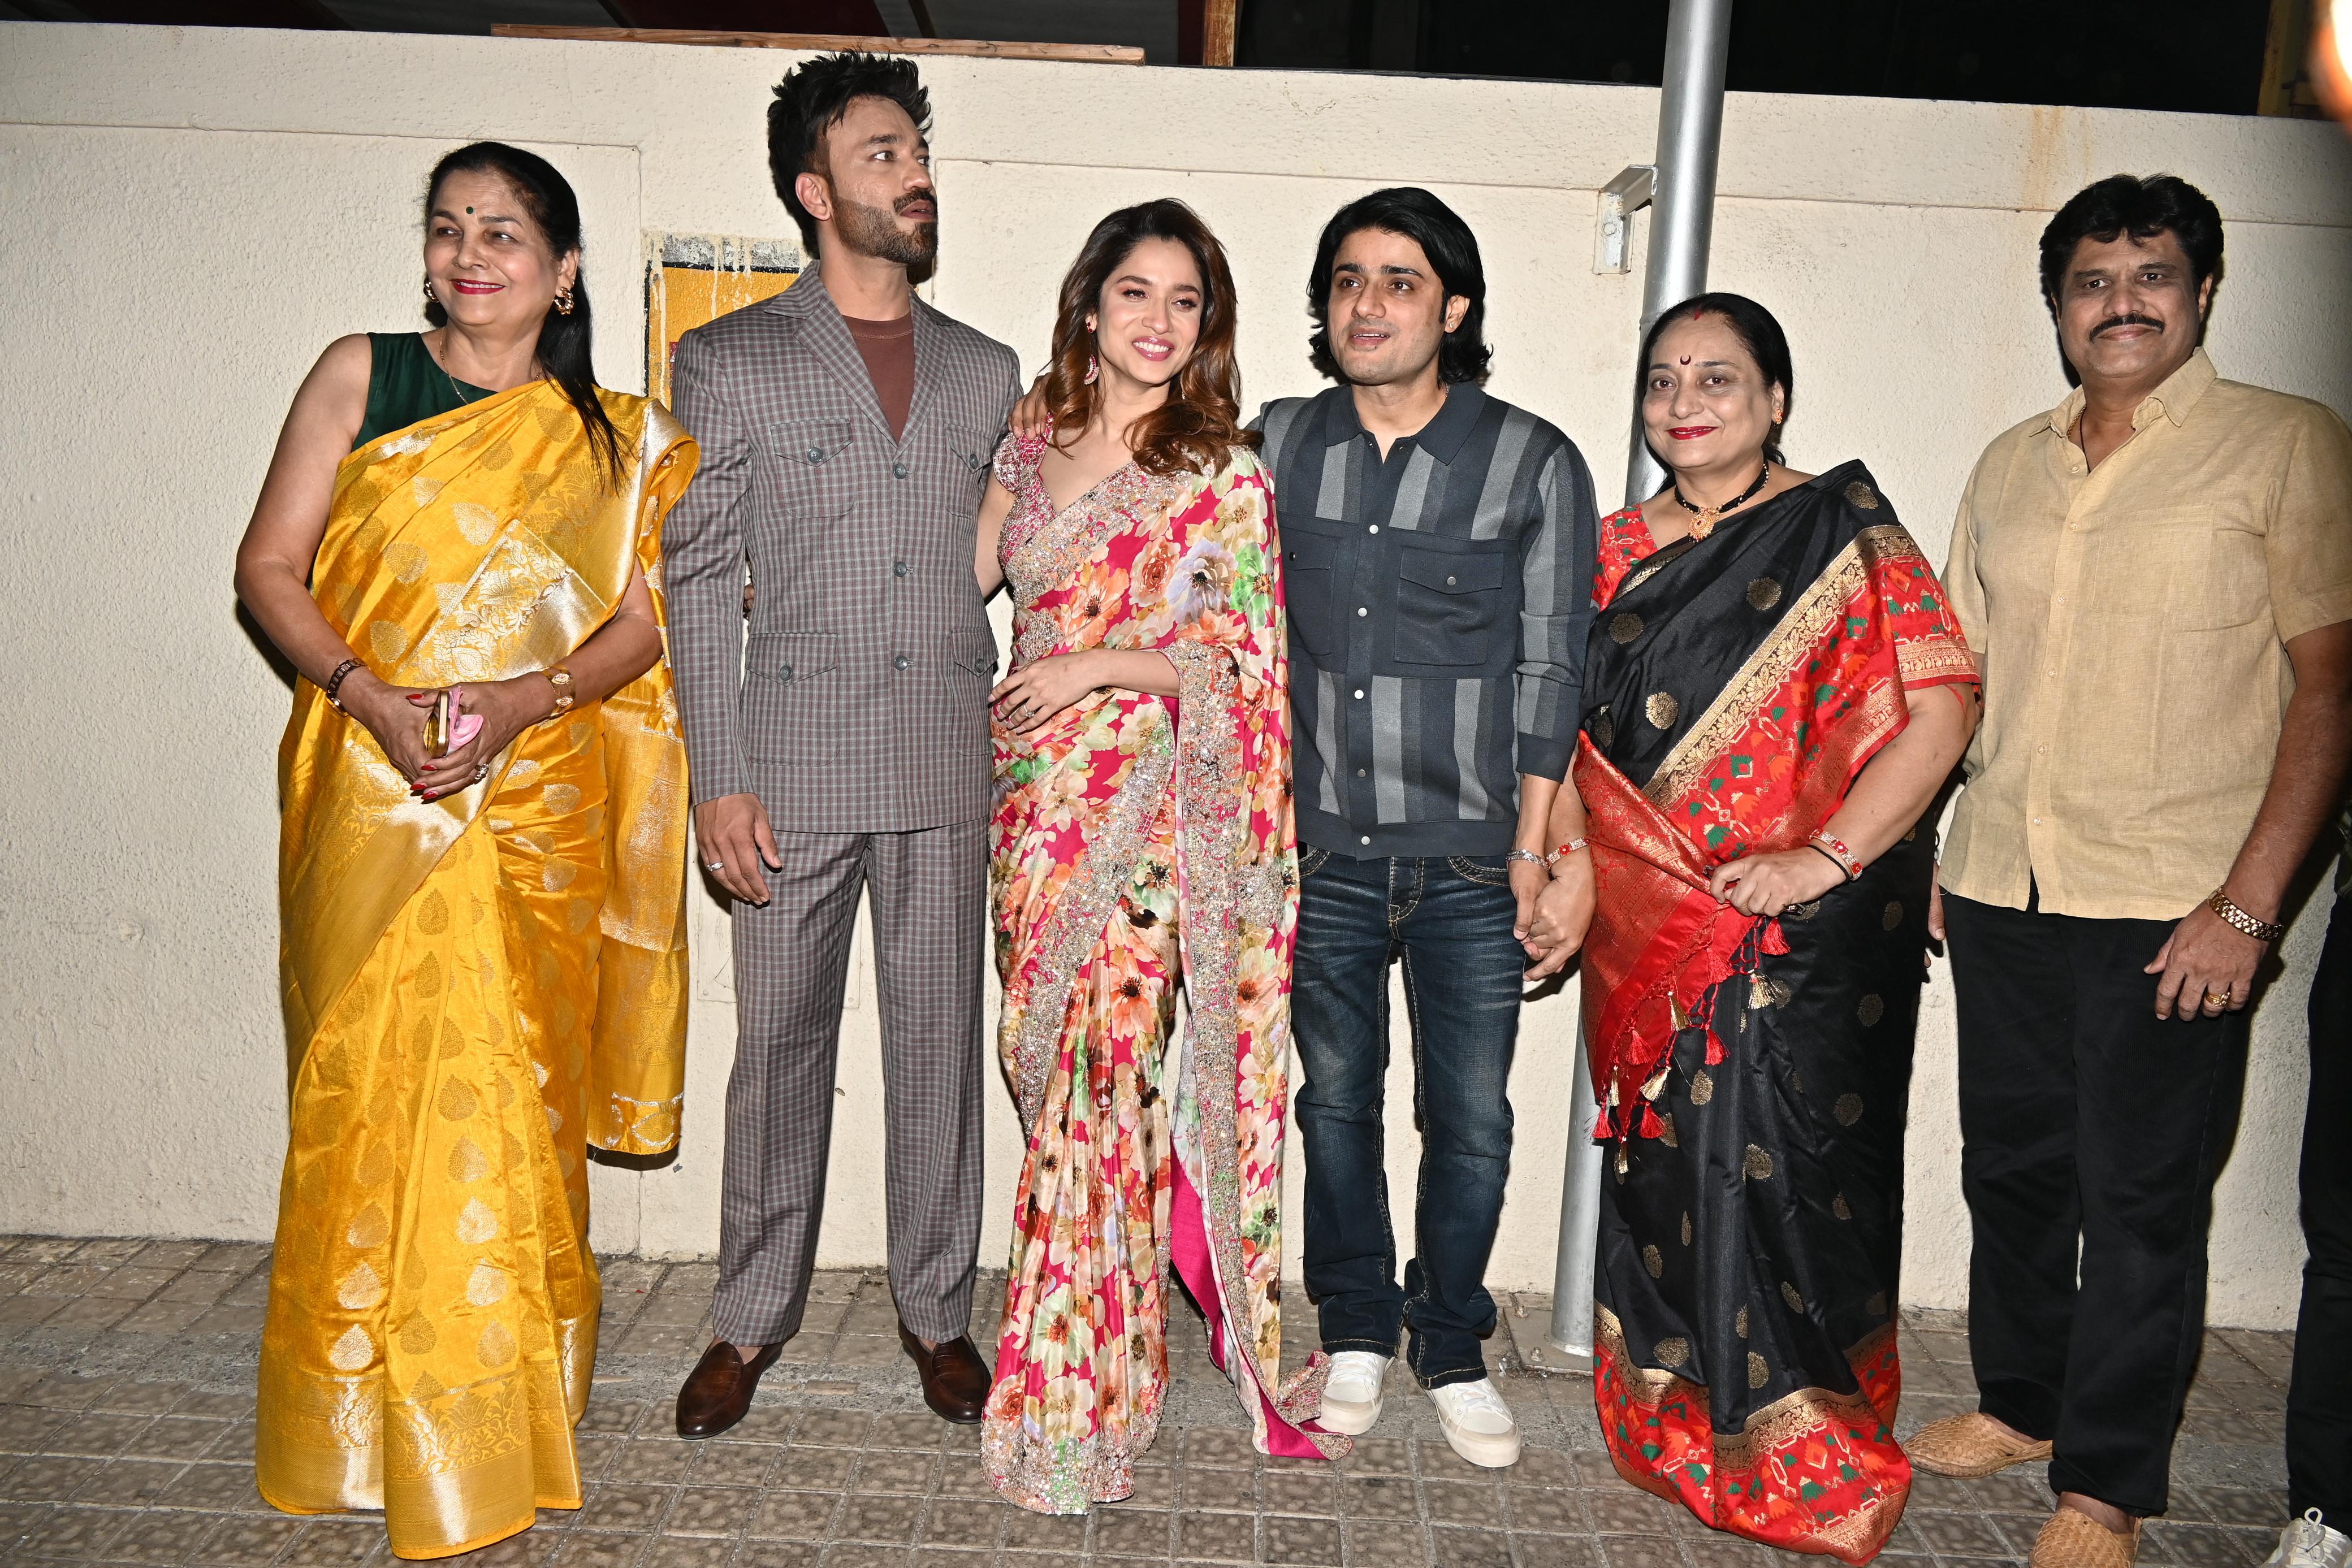 Ankita Lokhande's family was also present at the event